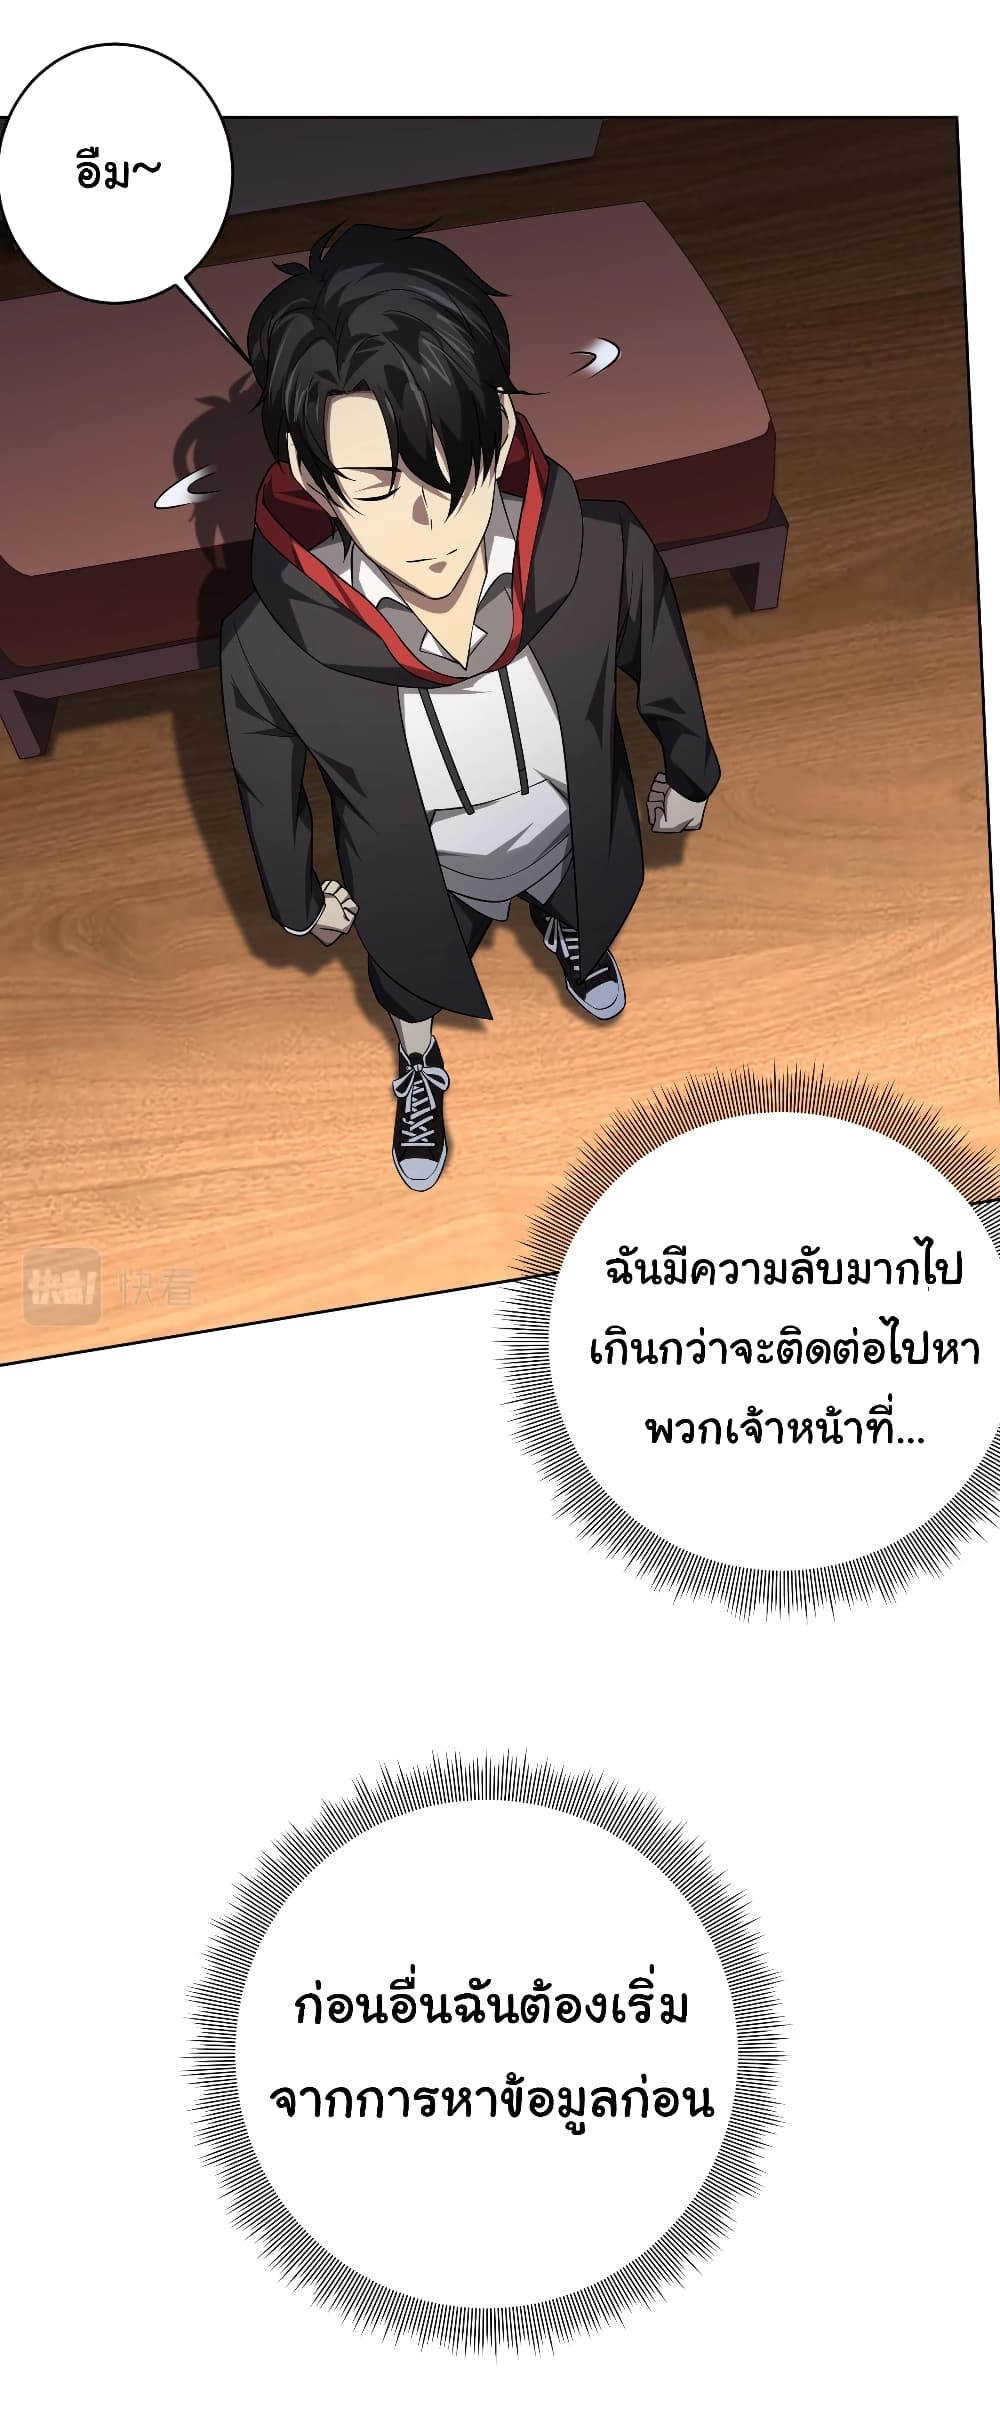 Start with Trillions of Coins ตอนที่ 11 (14)